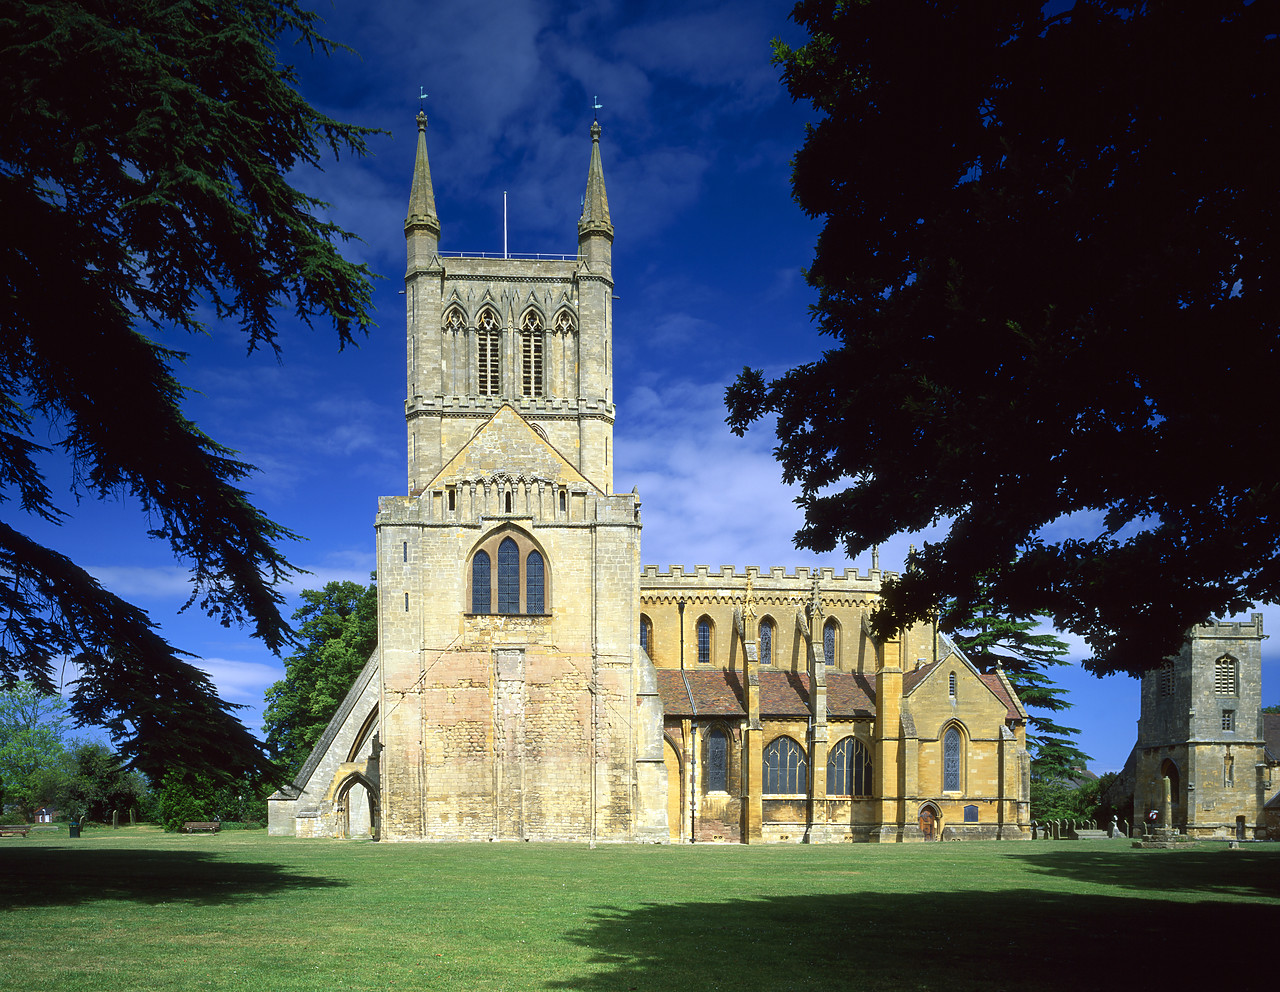 #990431-2 - Pershore Abbey, Herefordshire, England